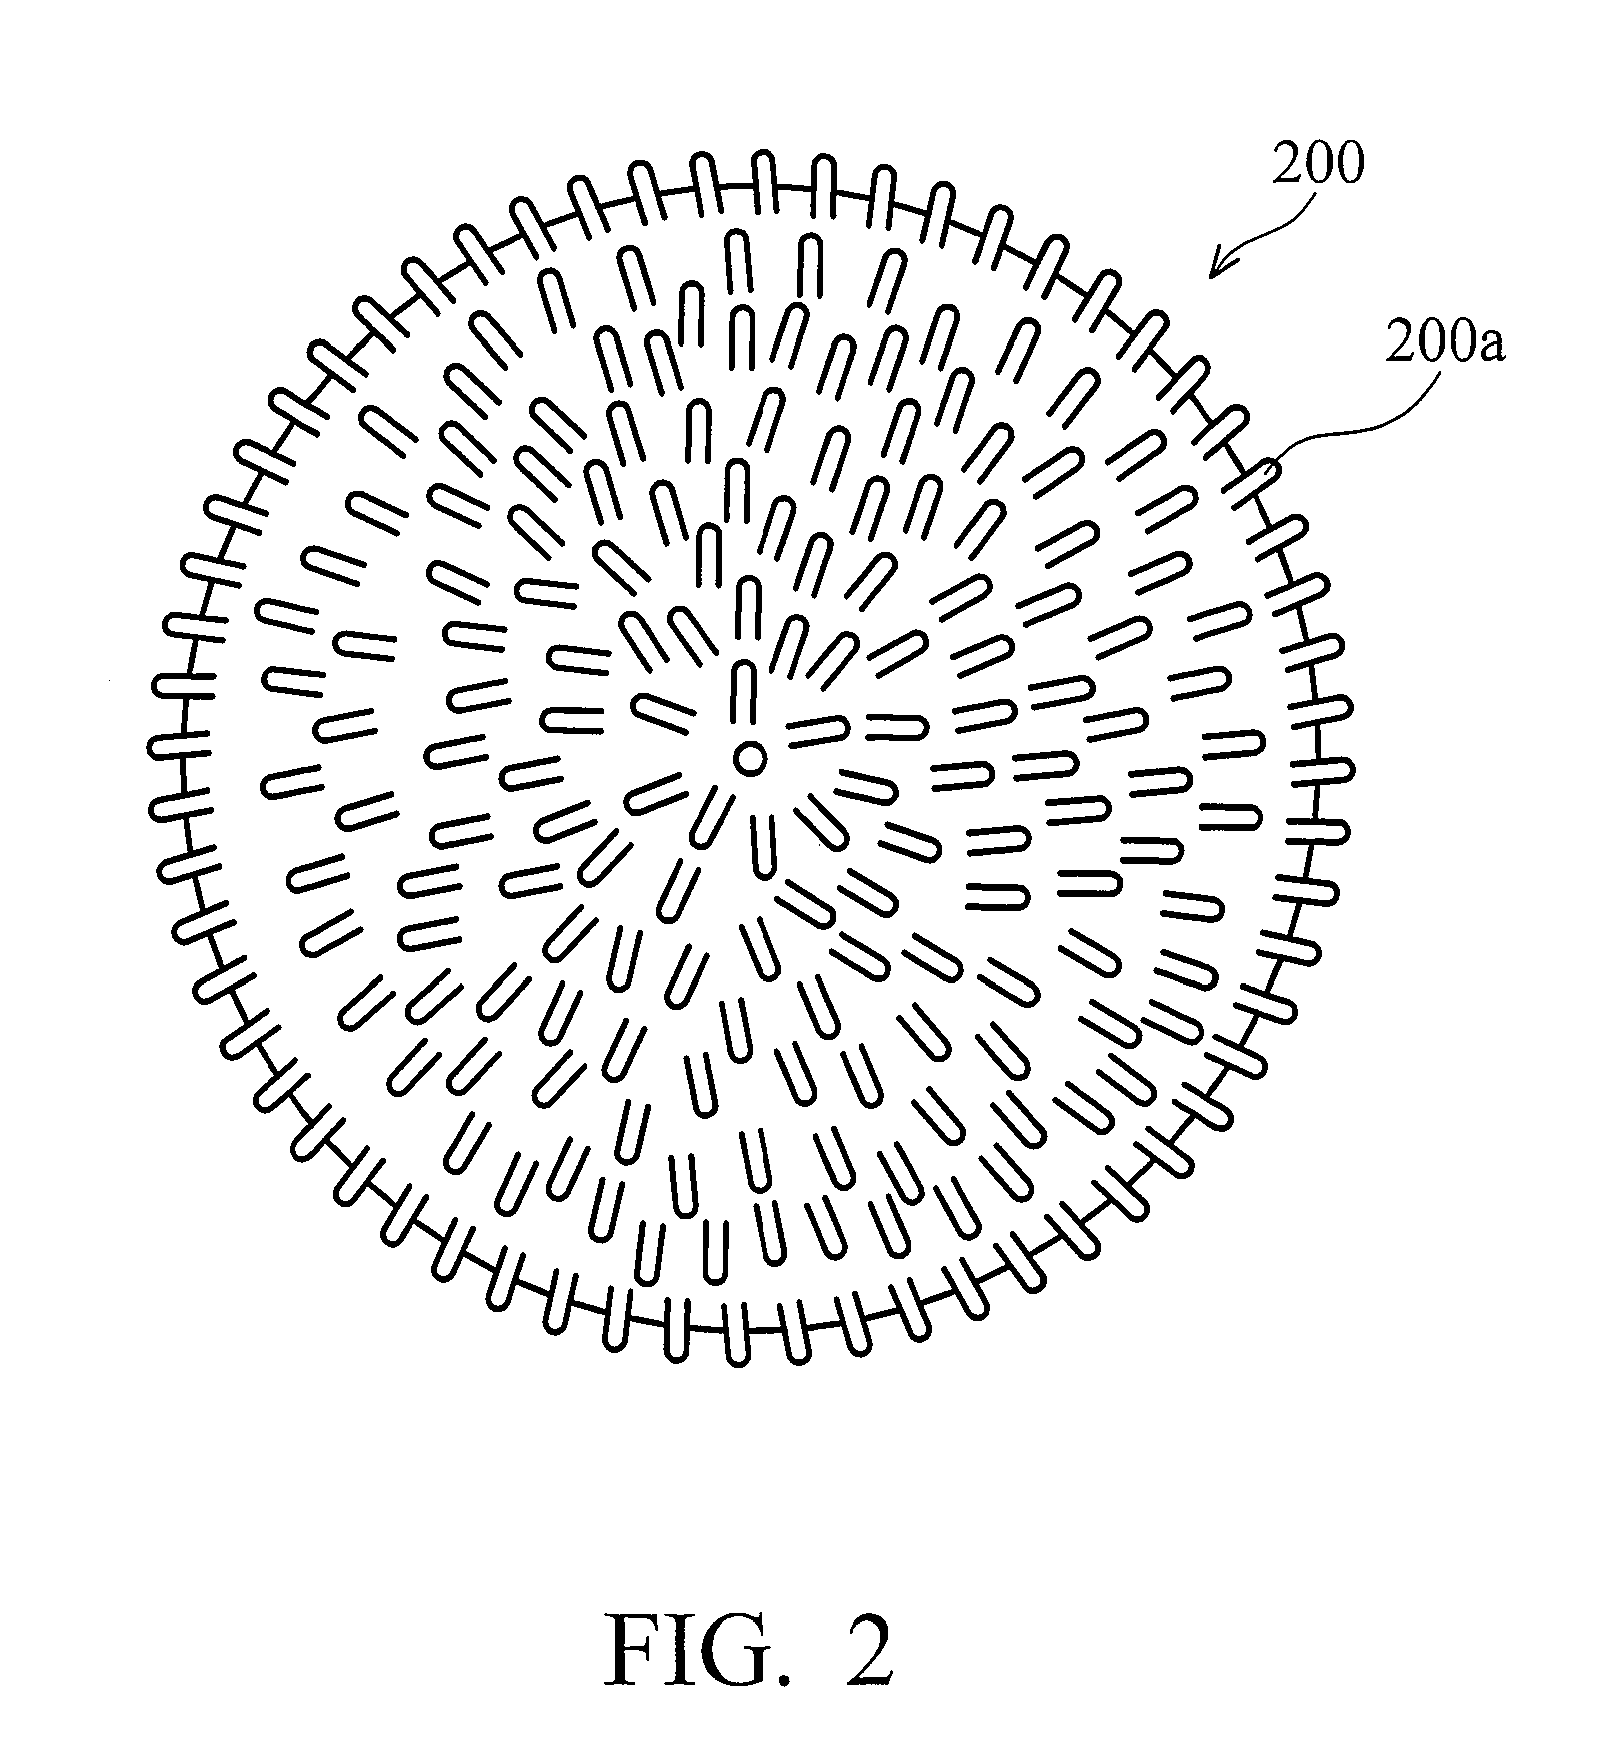 Superhydrophobic and self-cleaning powders and fabrication method thereof